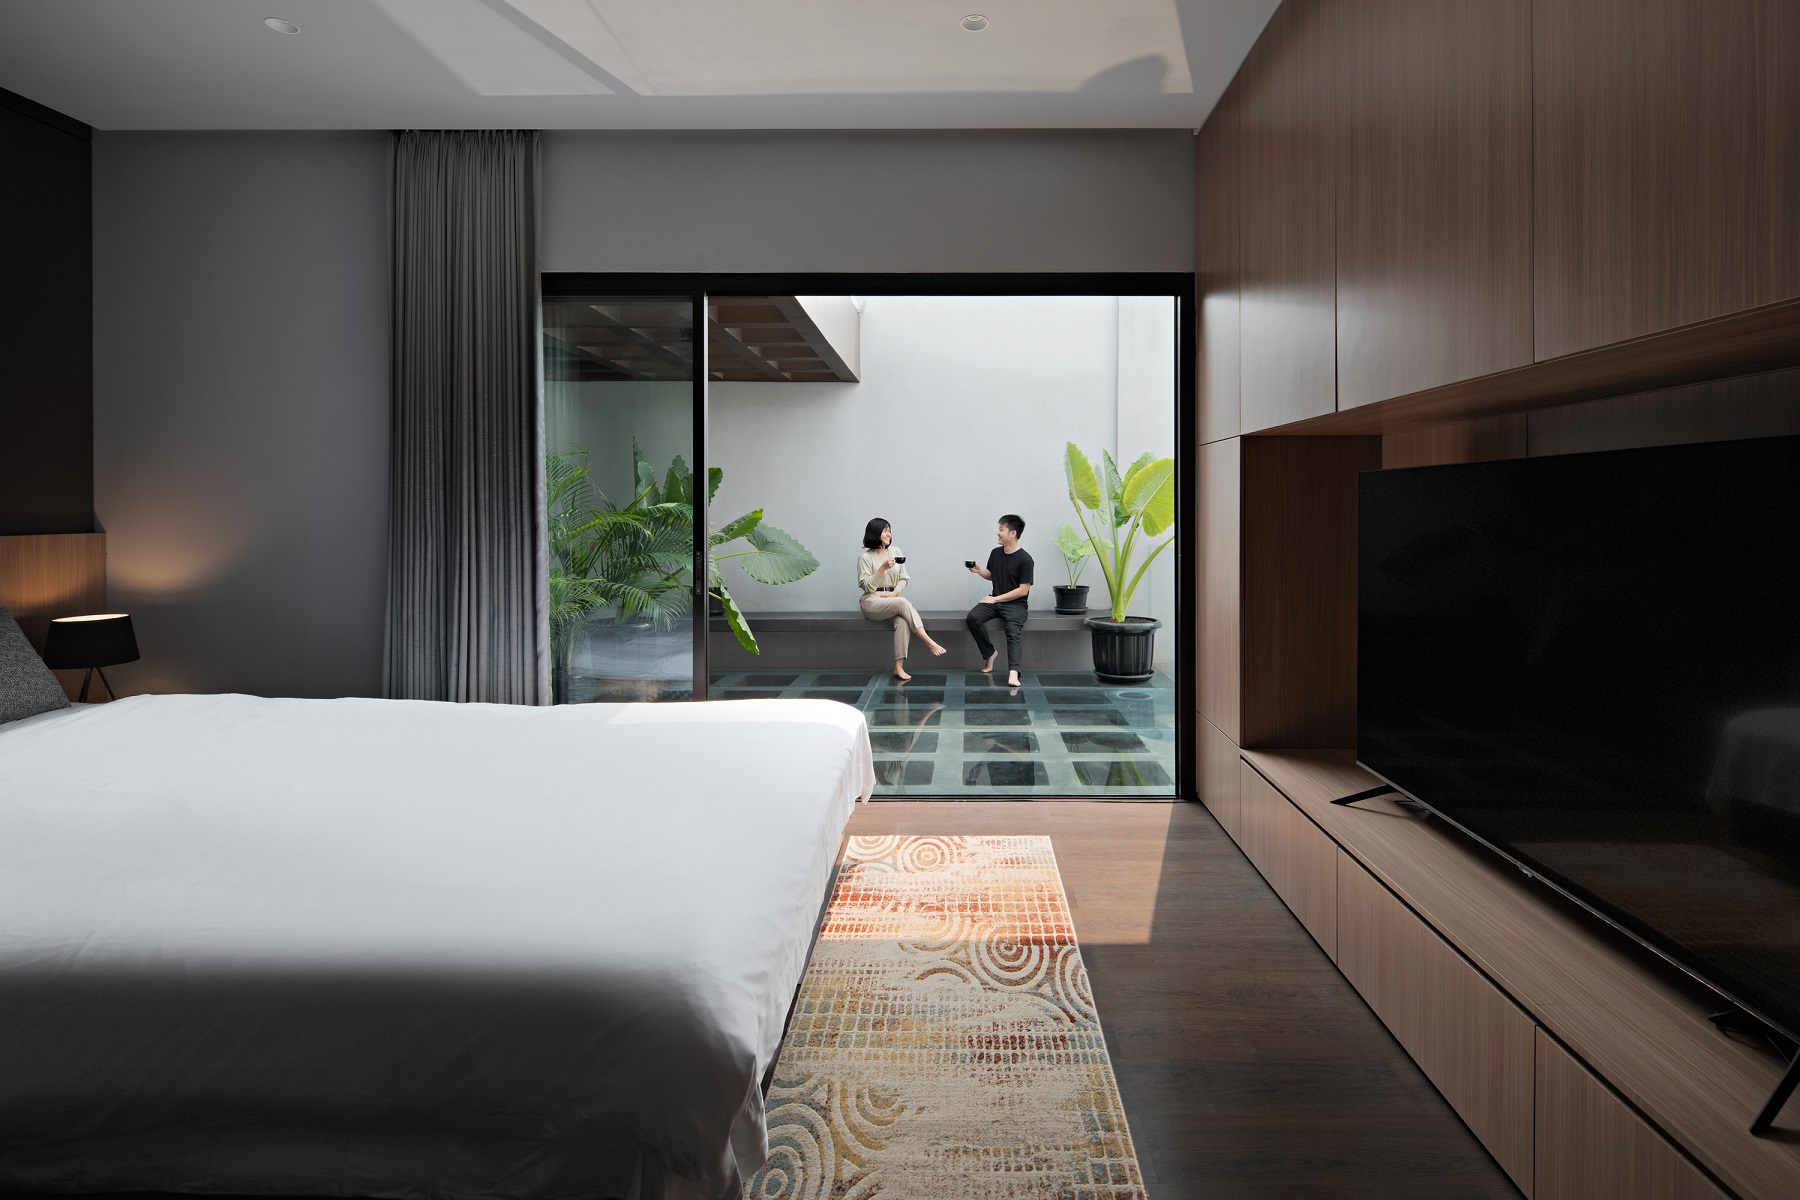 Interior view of the master bedroom RifBagus House, Photo by Mario Wibowo